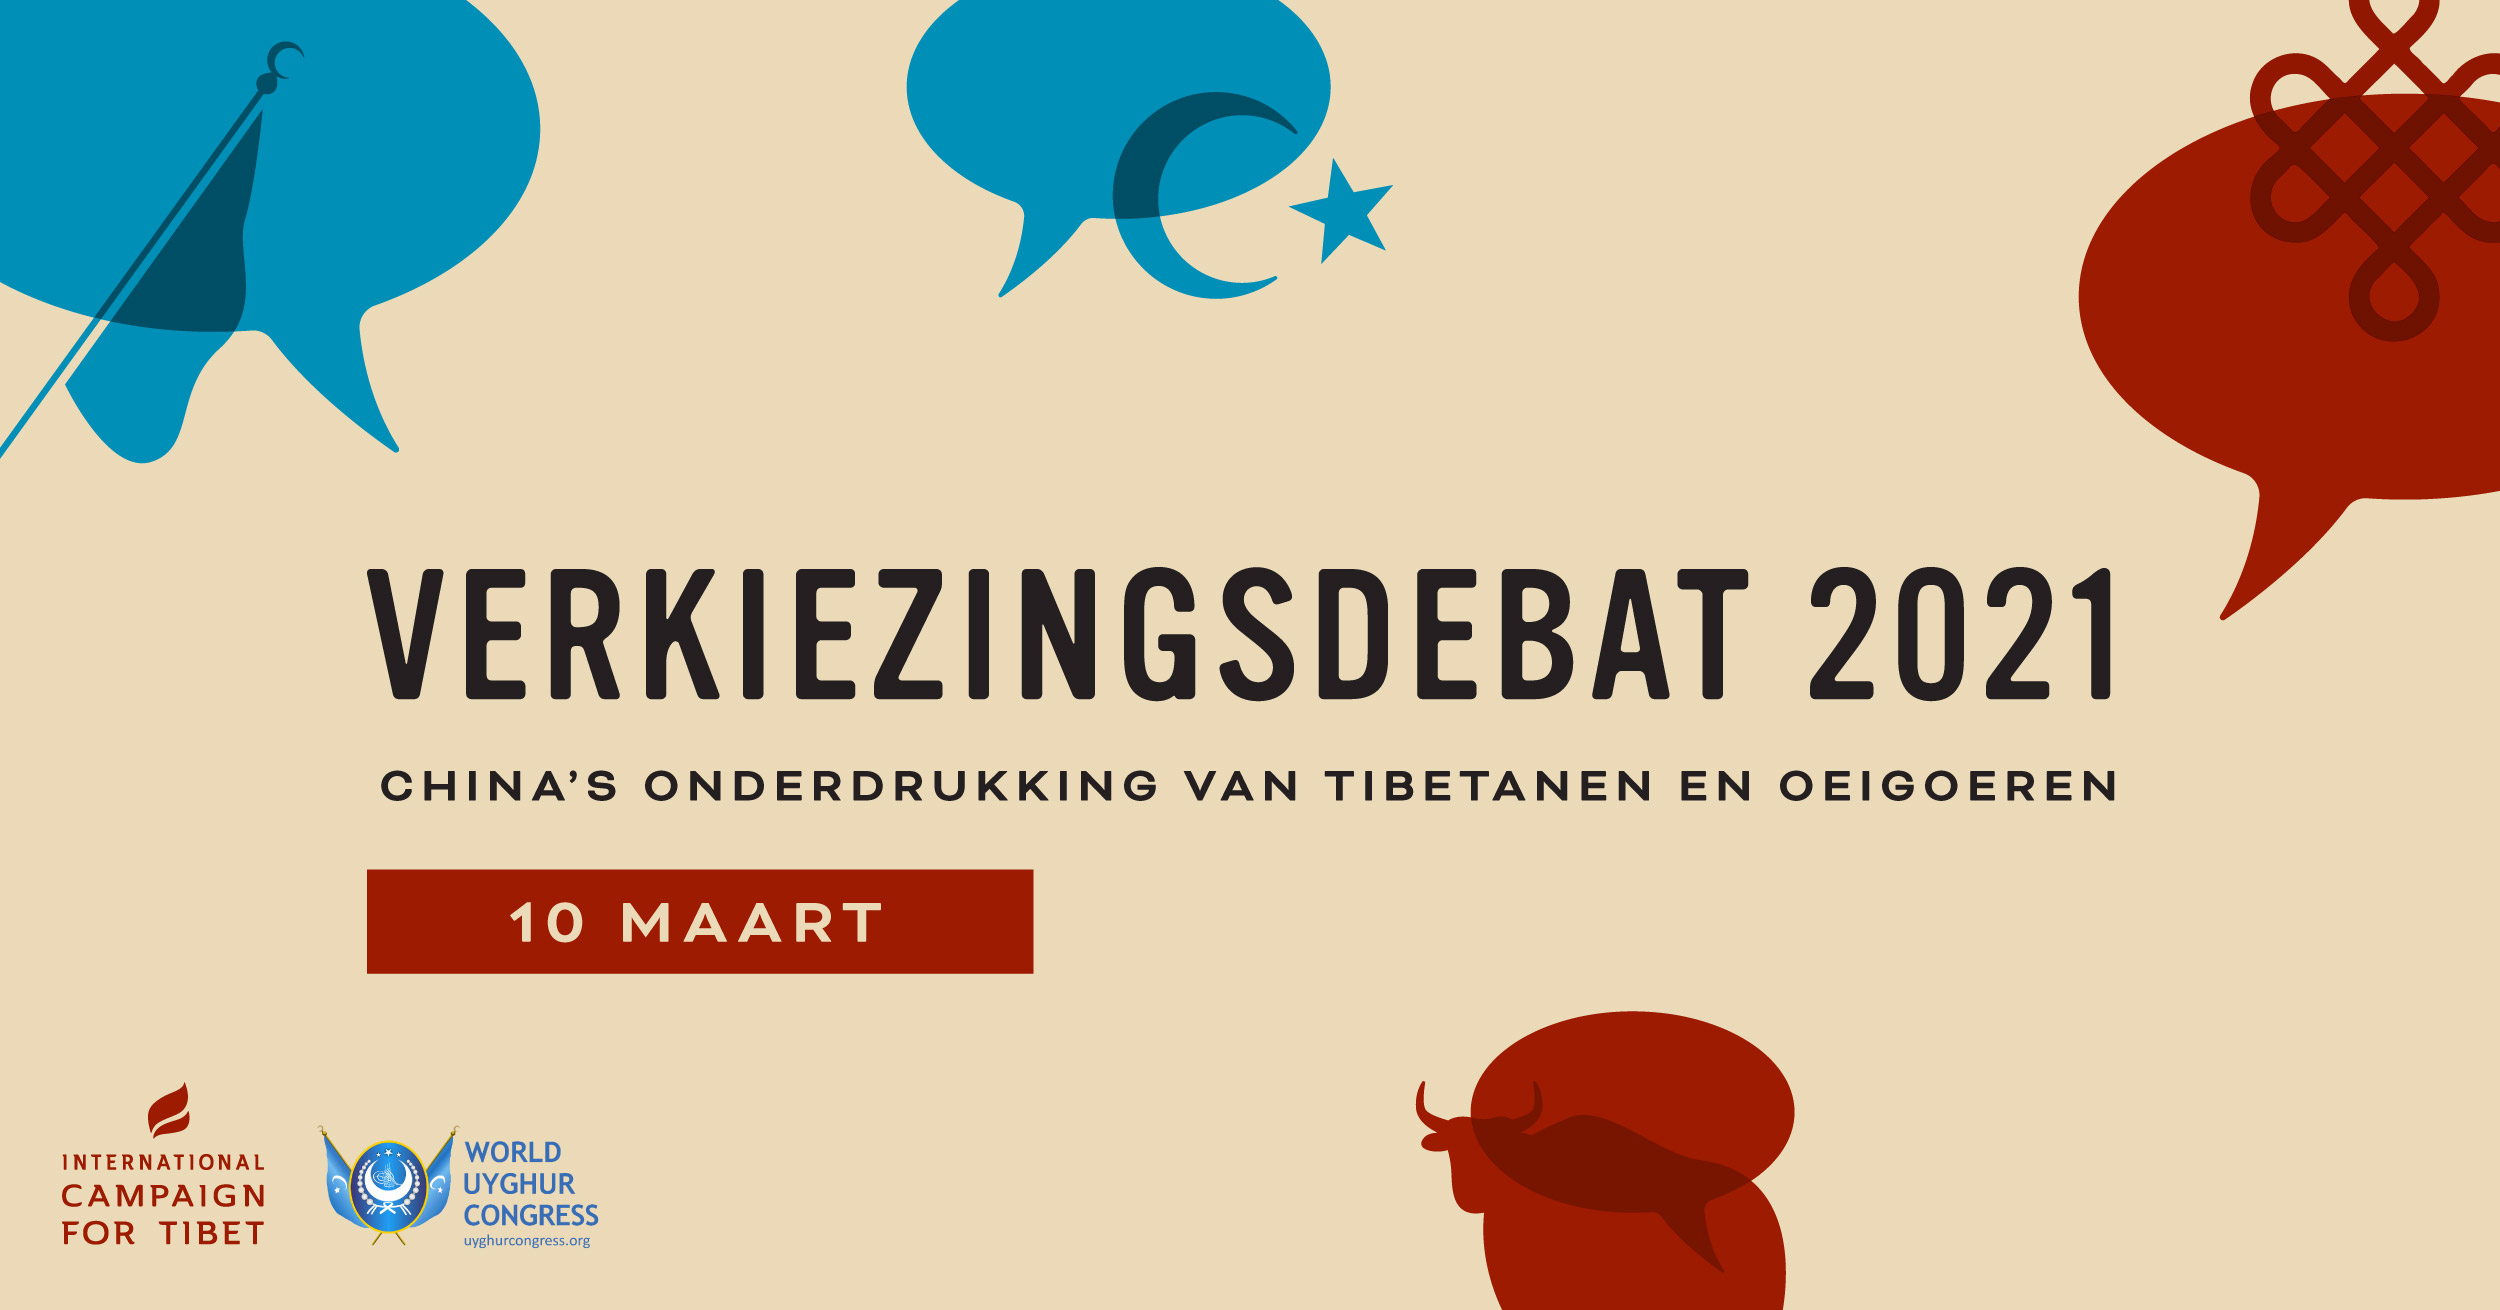 Netherlands Election Debate 2021: China’s Repression of Tibetans and Uyghurs